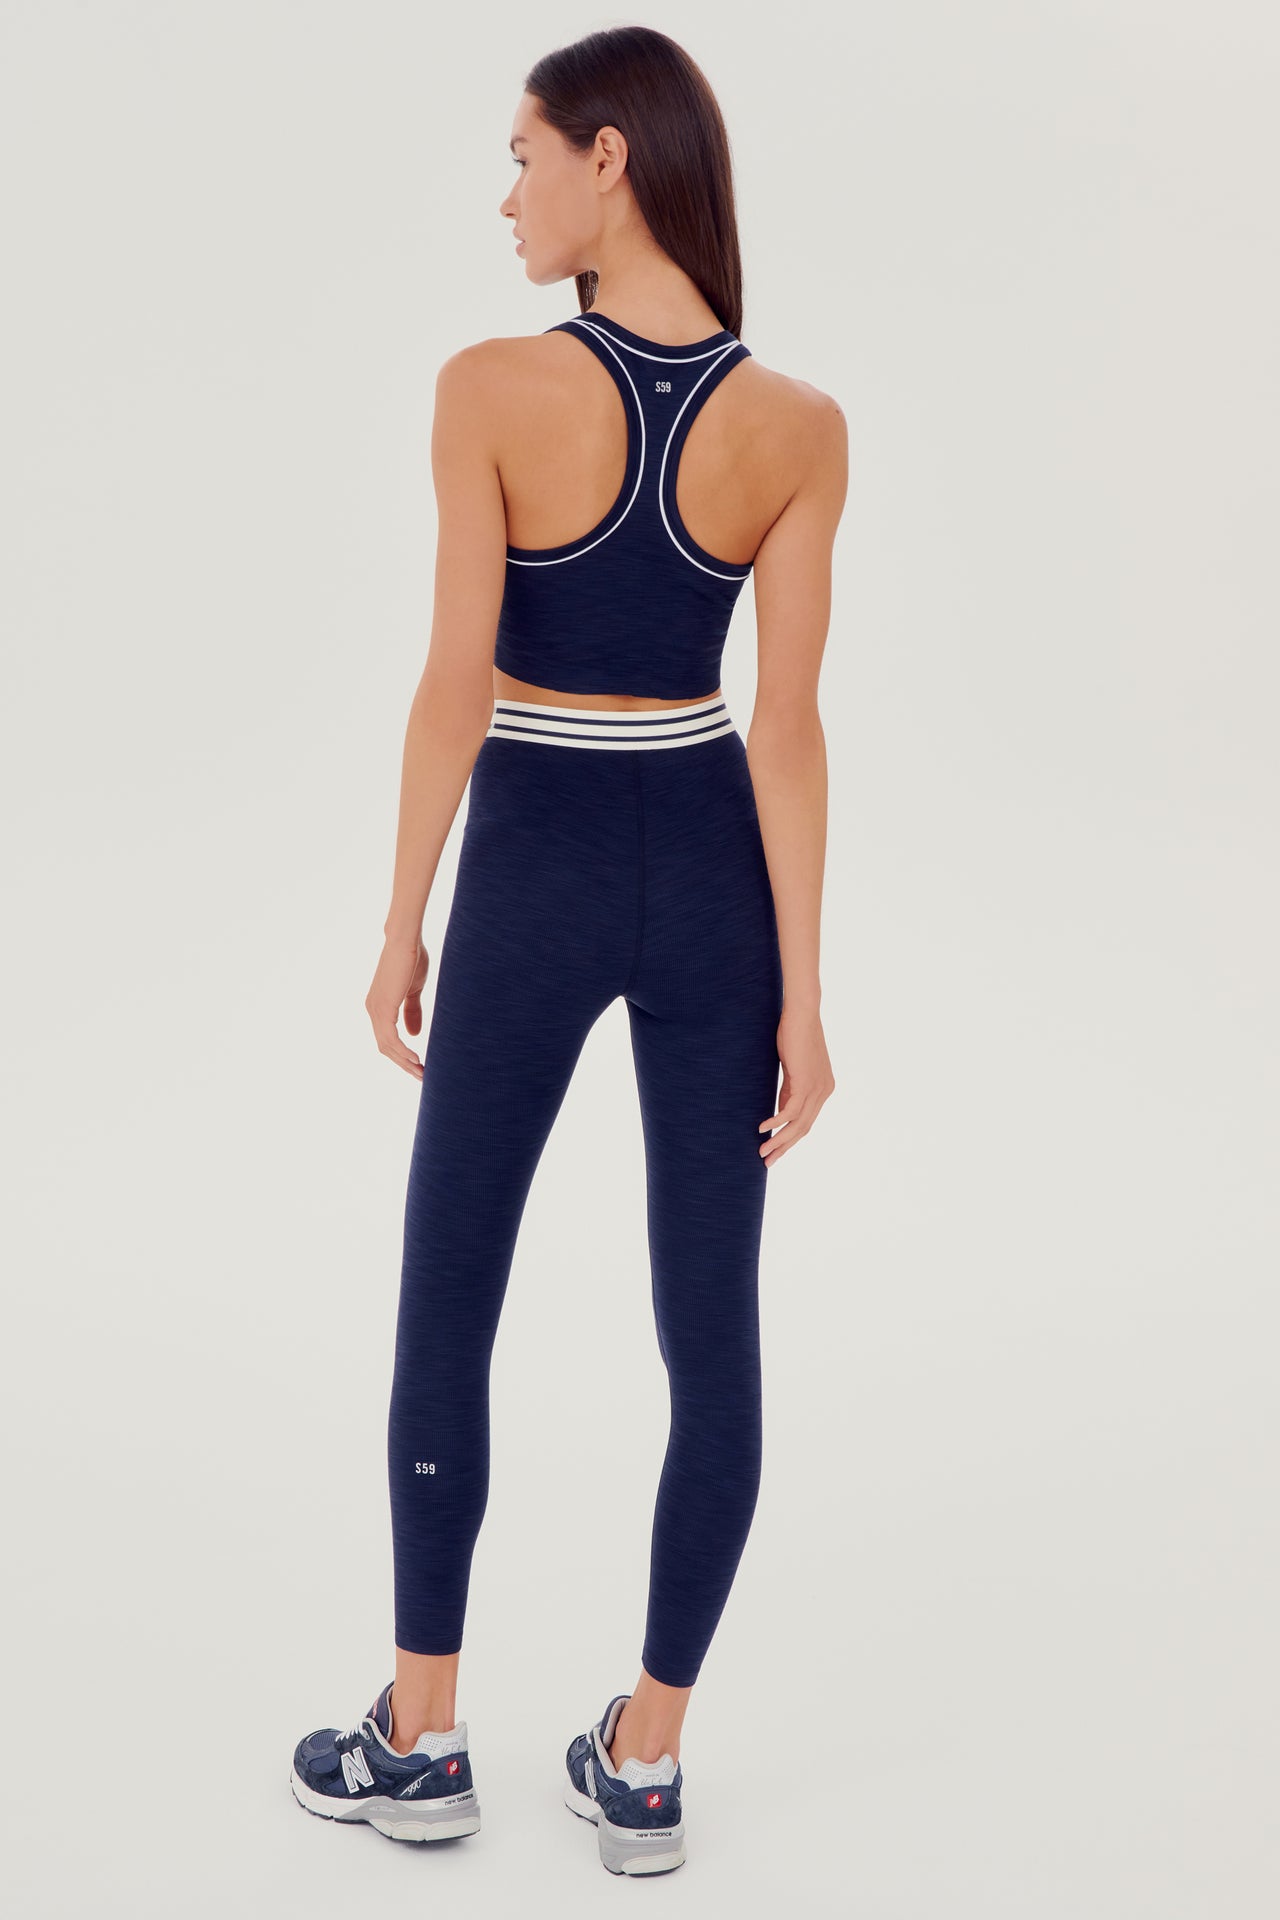 Full back view of girl wearing a dark blue ribbed bra that stops at the ribs with thin white line along arms and collar with blue leggings with white and blue waistband and blue shoes